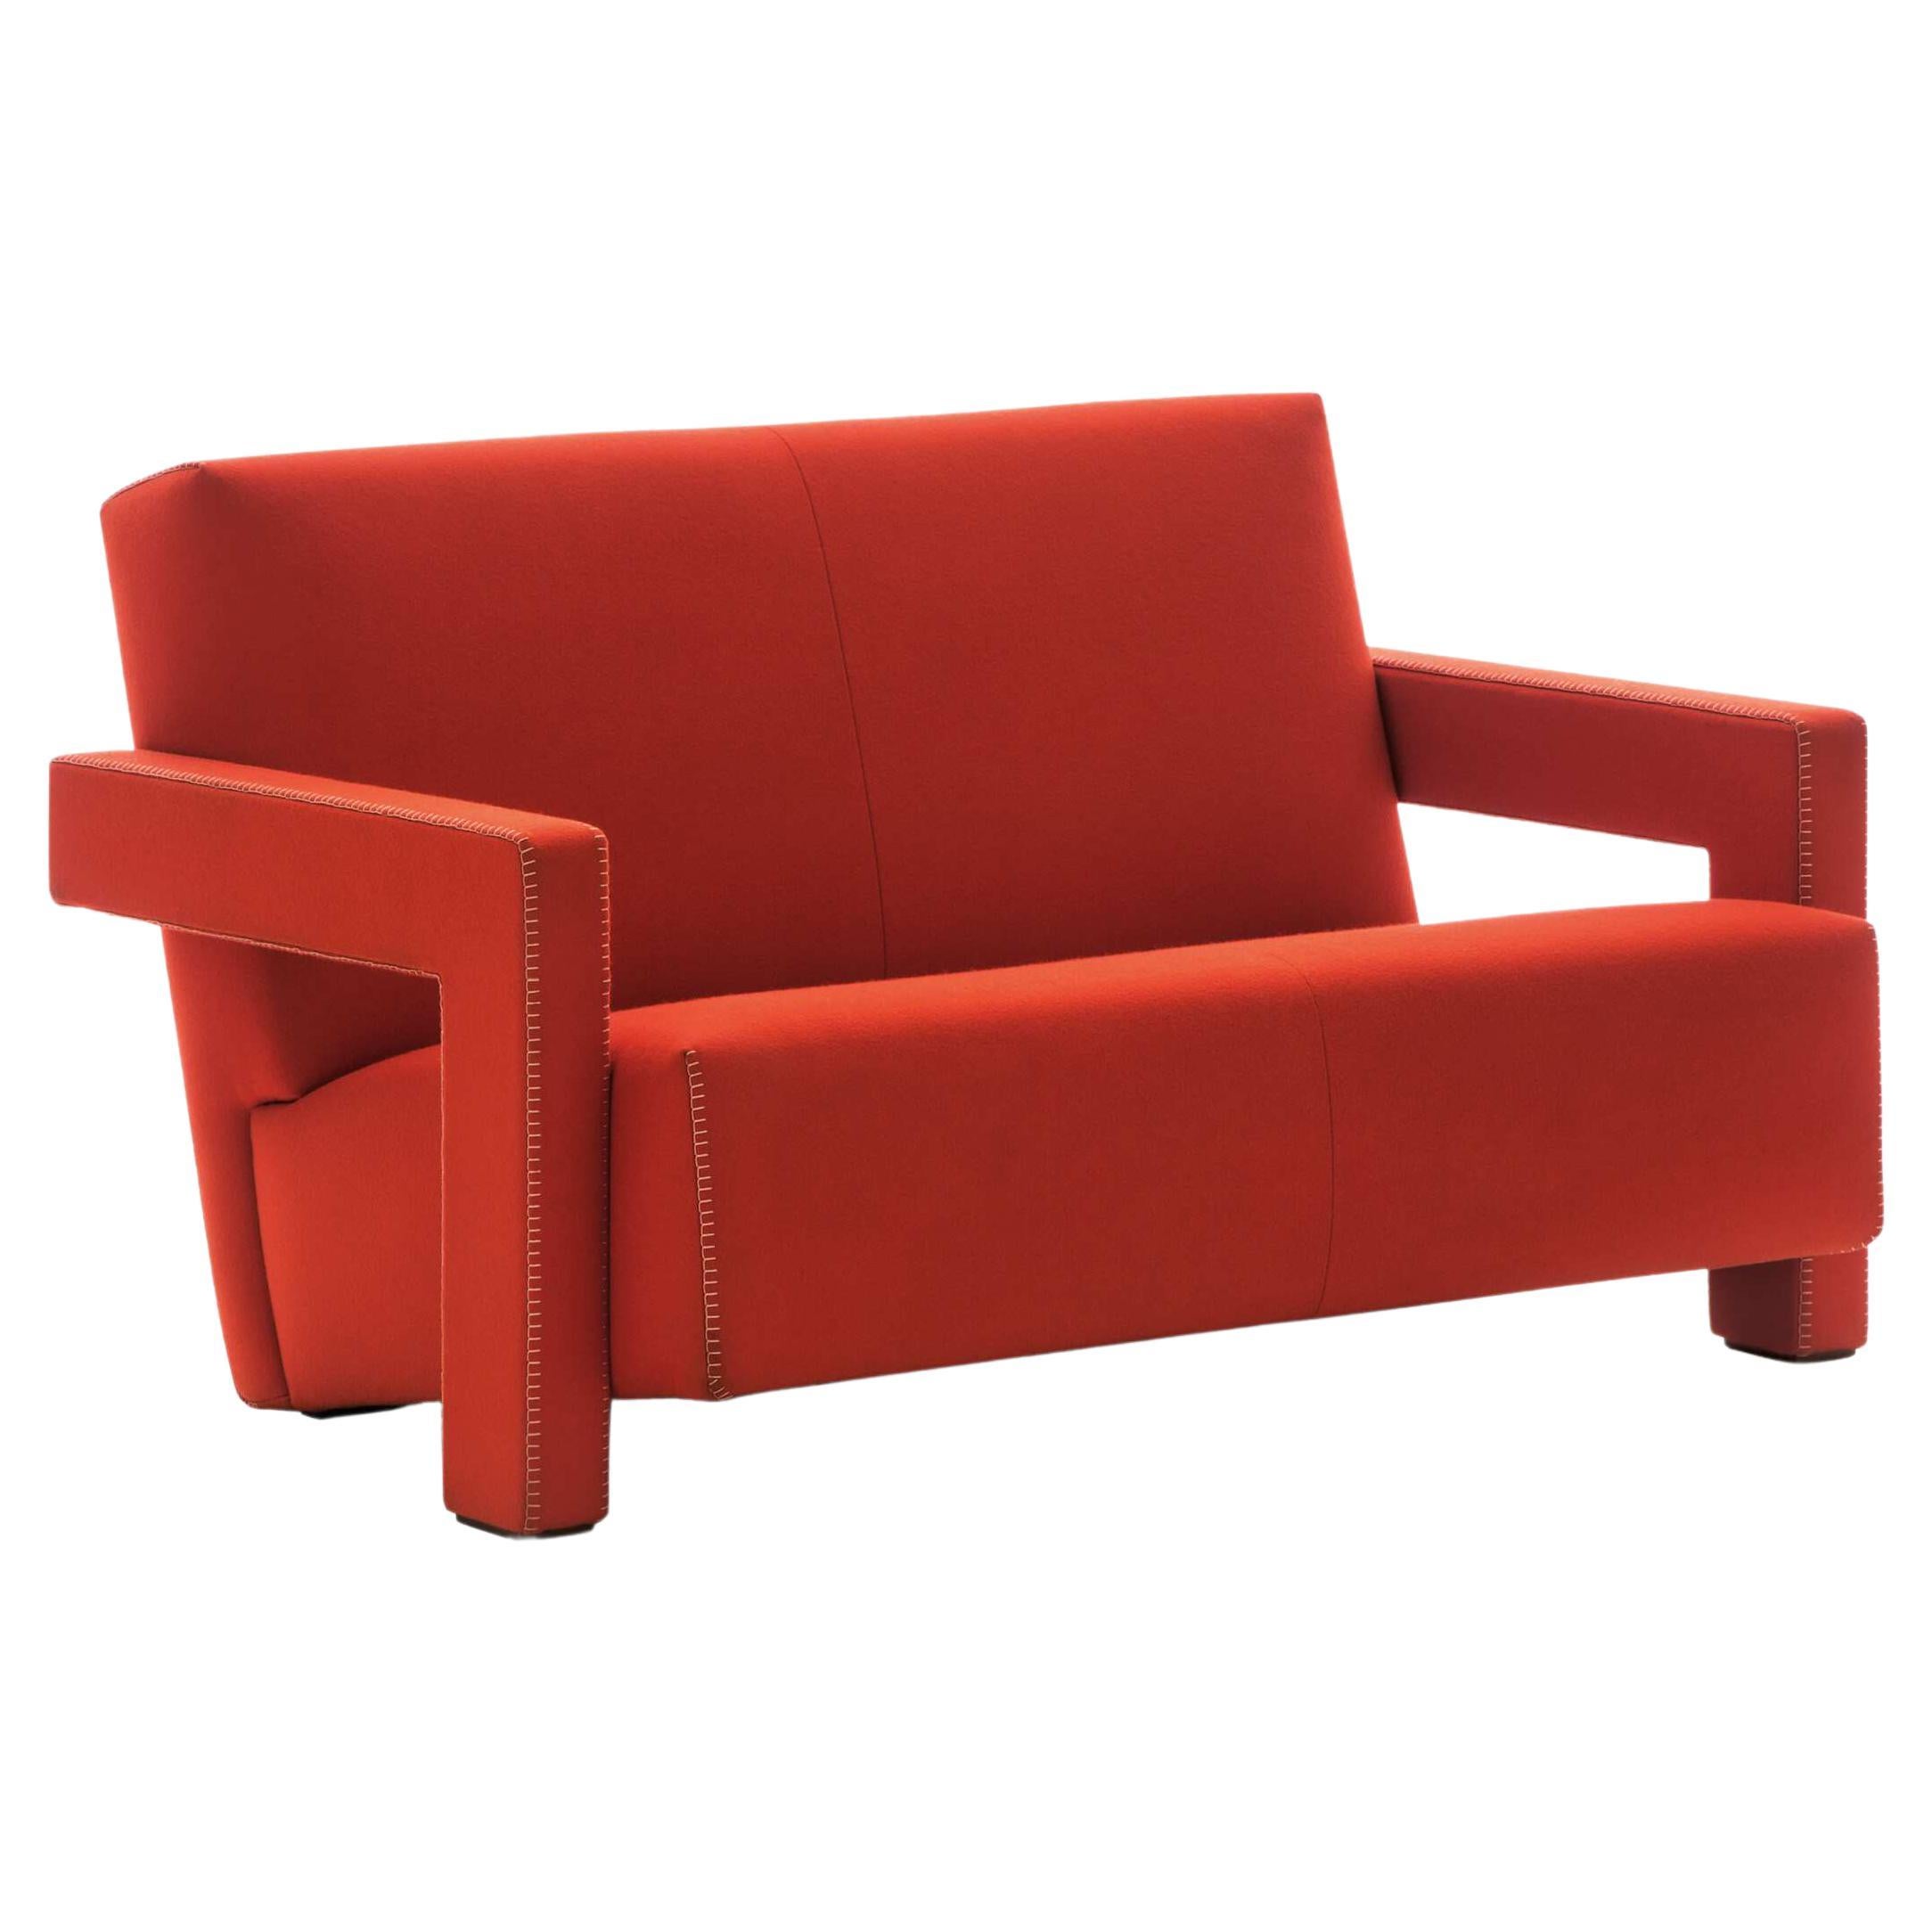 Gerrit Thomas Rietveld Red Wide Utrech Armchair by Cassina For Sale